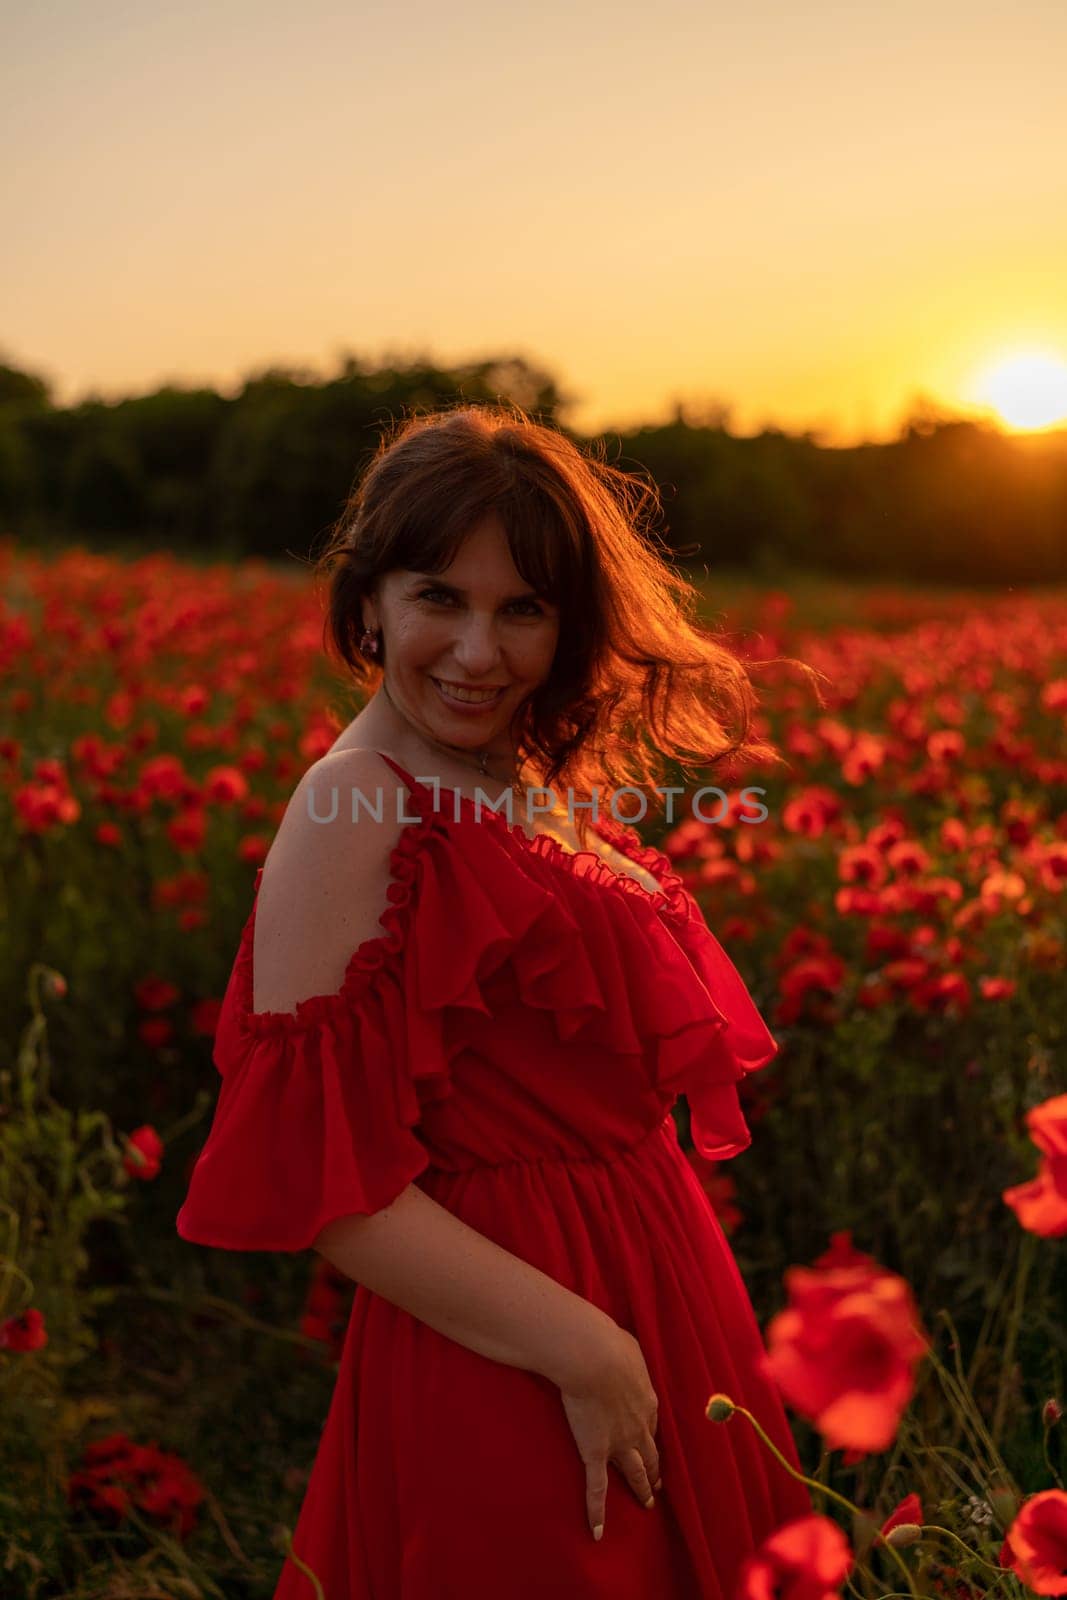 Woman poppy field red dress sunset. Happy woman in a long red dress in a beautiful large poppy field. Blond stands with her back posing on a large field of red poppies.